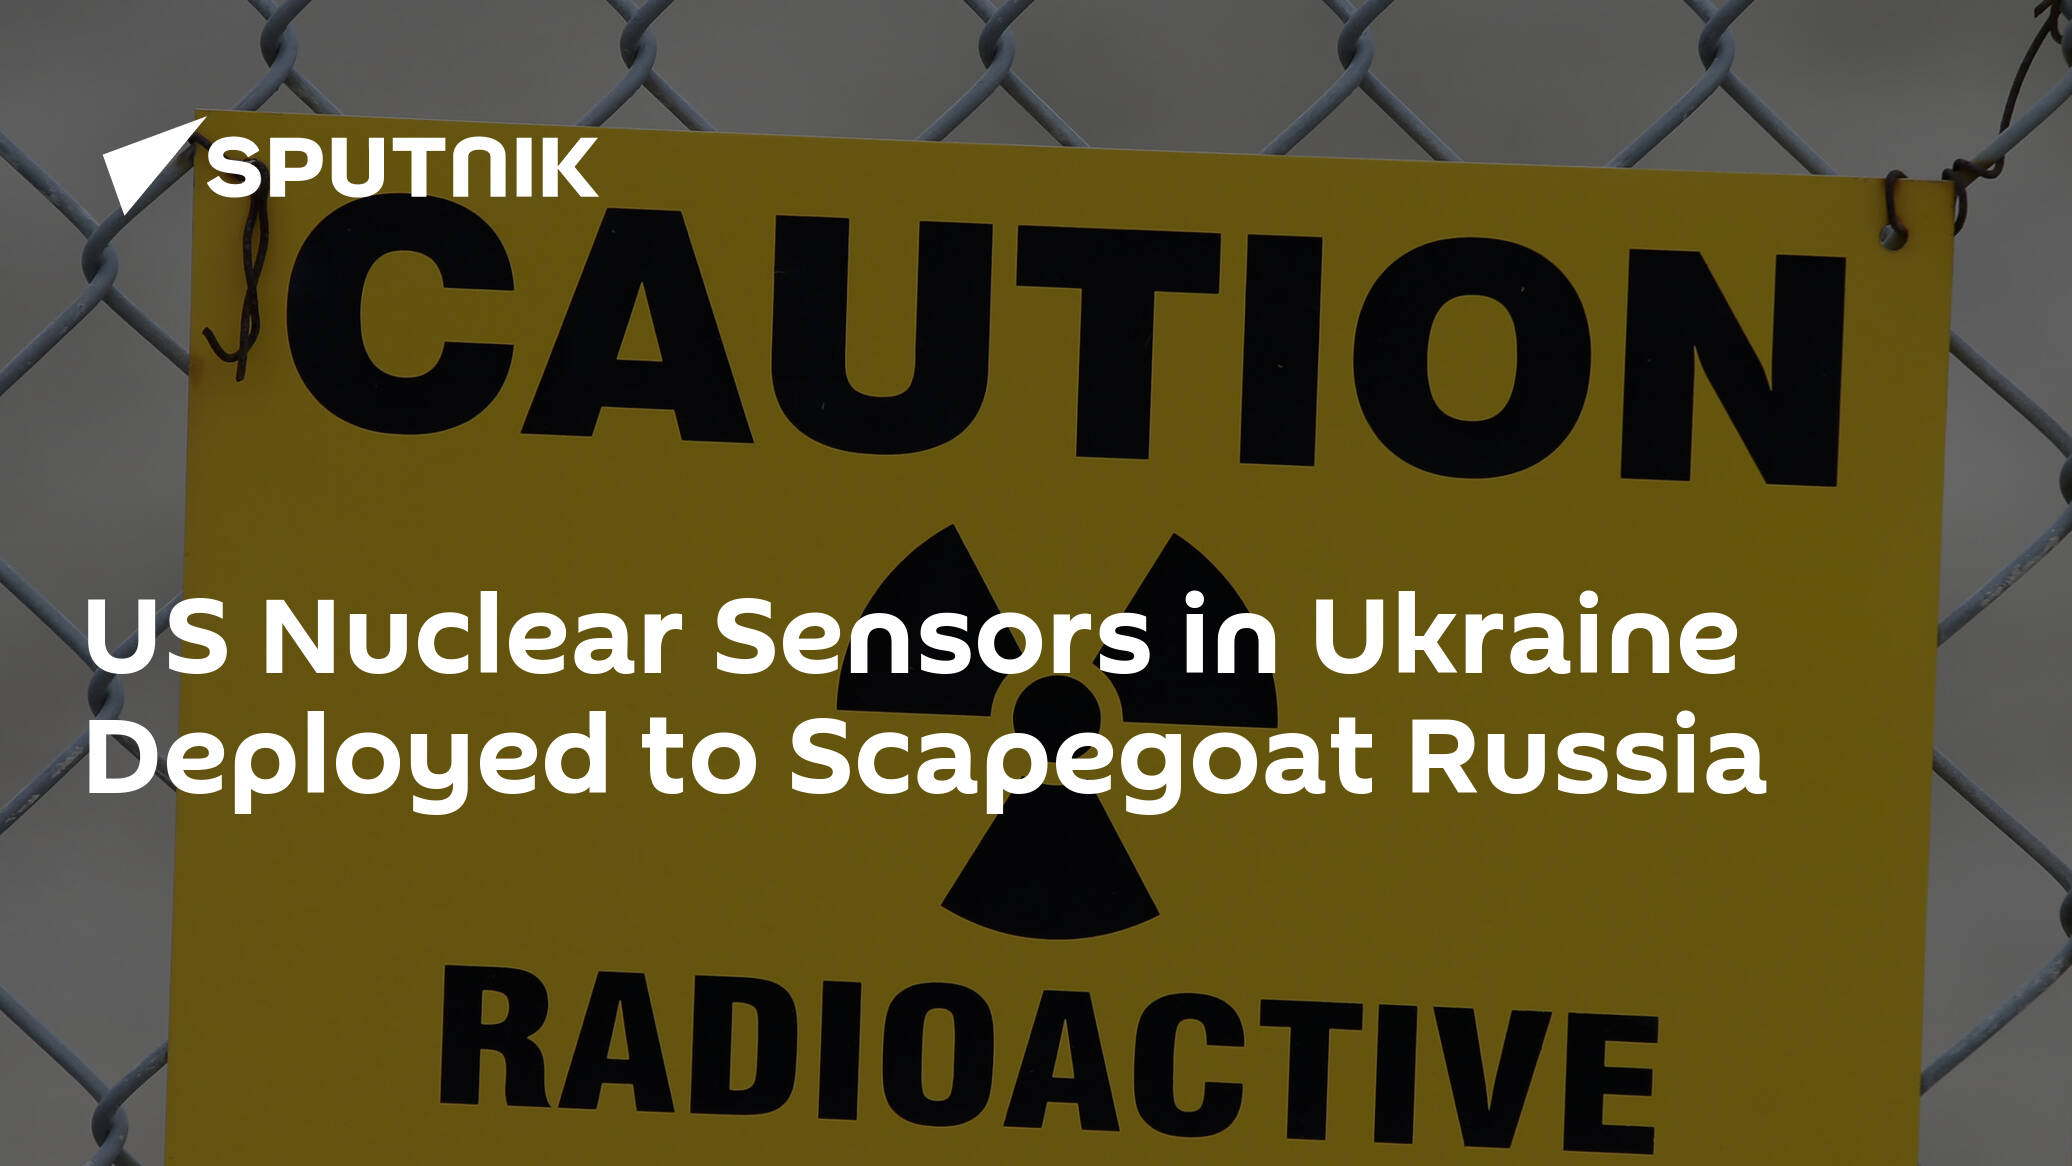 US Nuclear Sensors in Ukraine Deployed to Scapegoat Russia